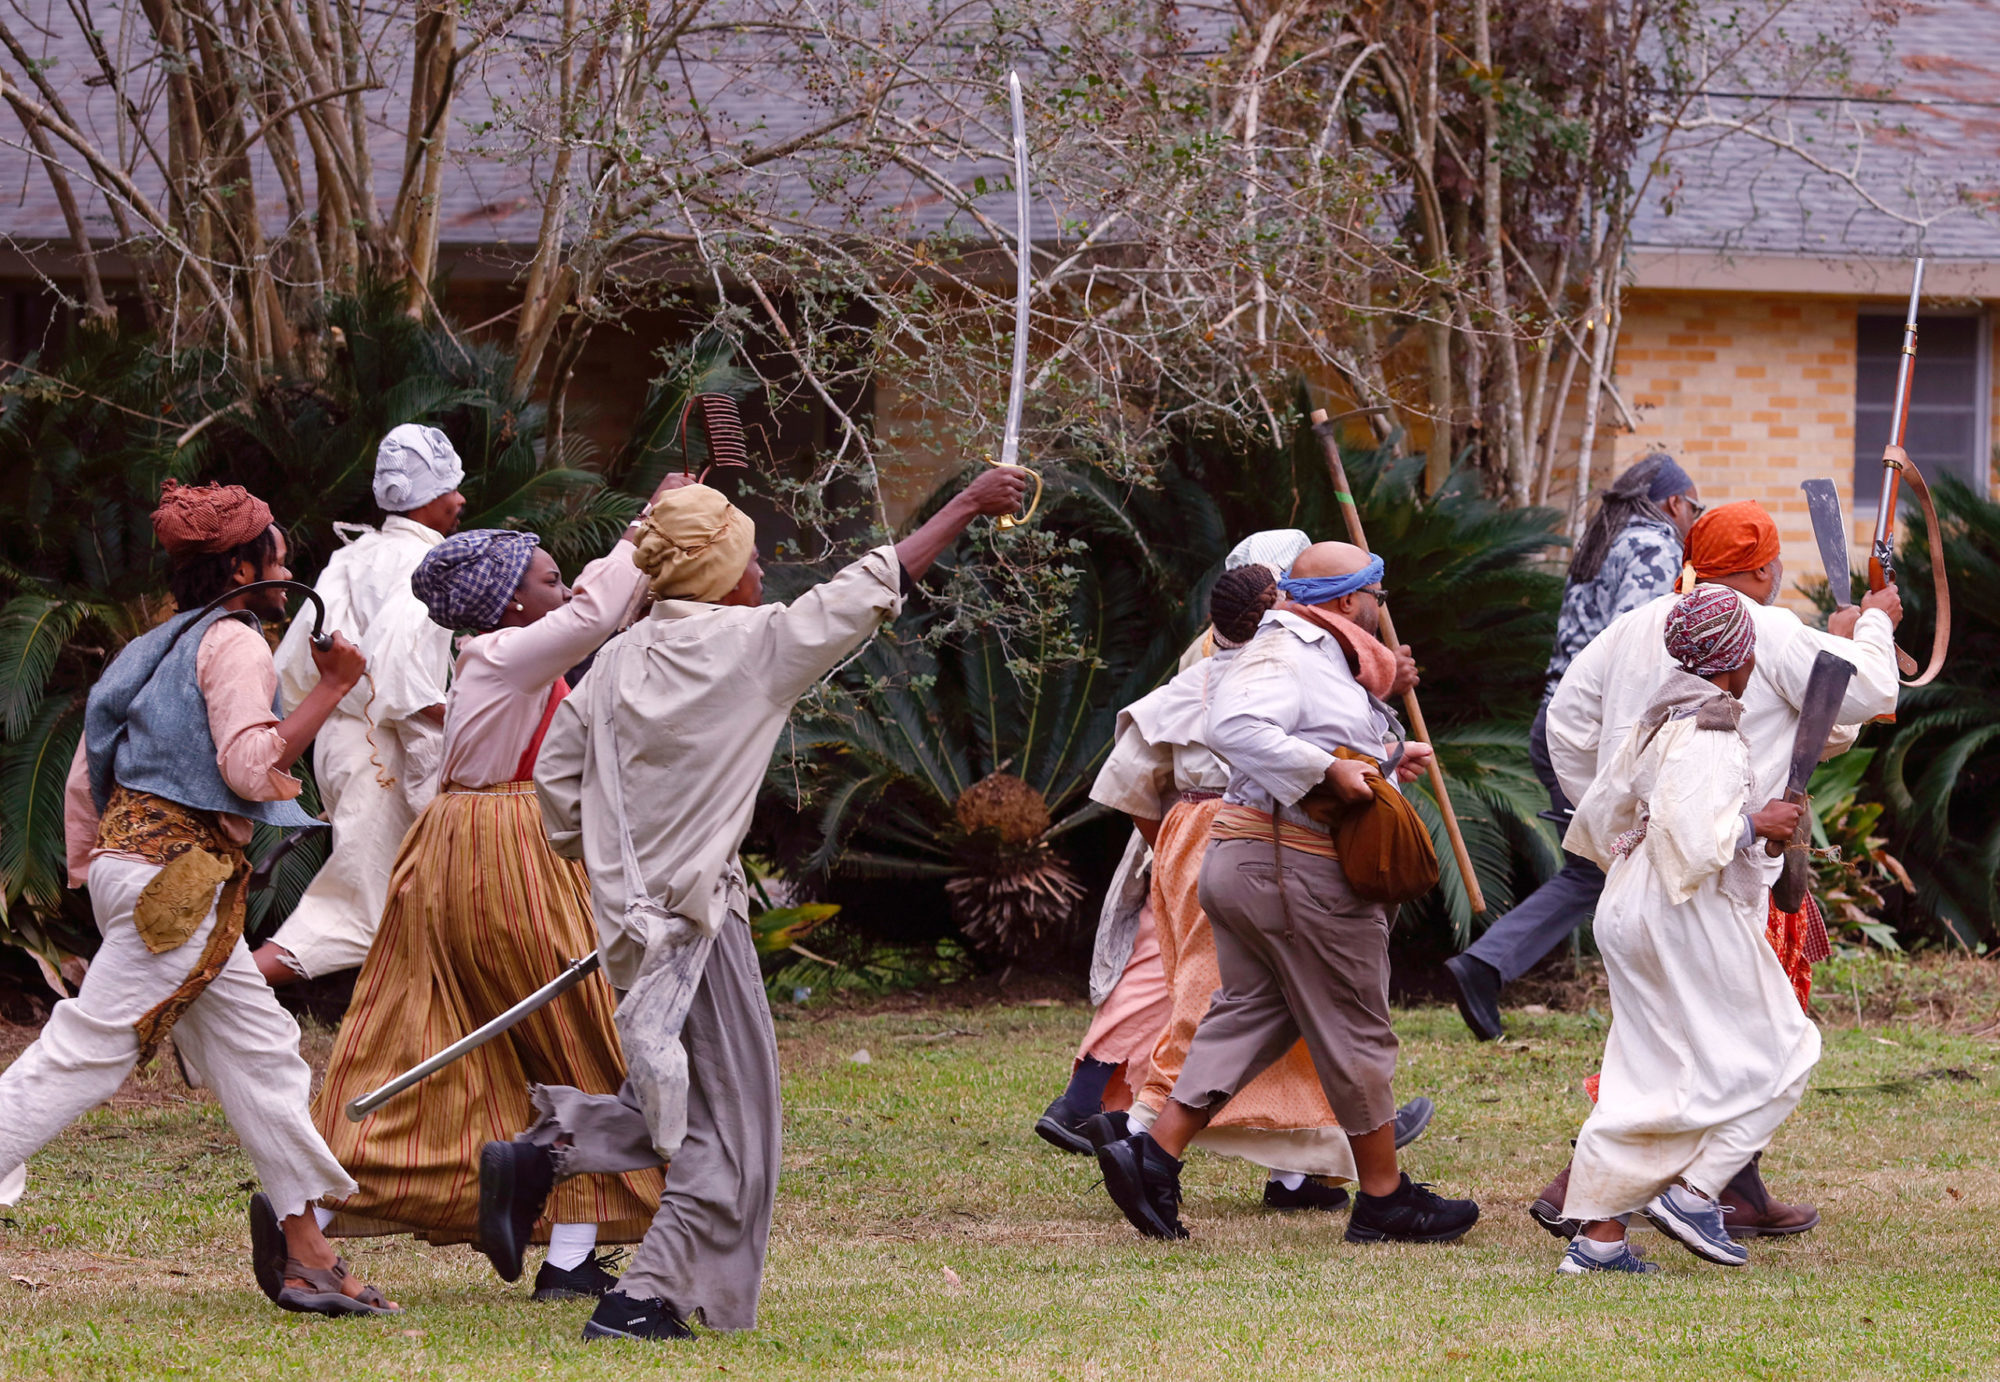 Documentation of the Slave Rebellion Reenactment, a community engaged performance initiated by Dread Scott in the outskirts of New Orleans